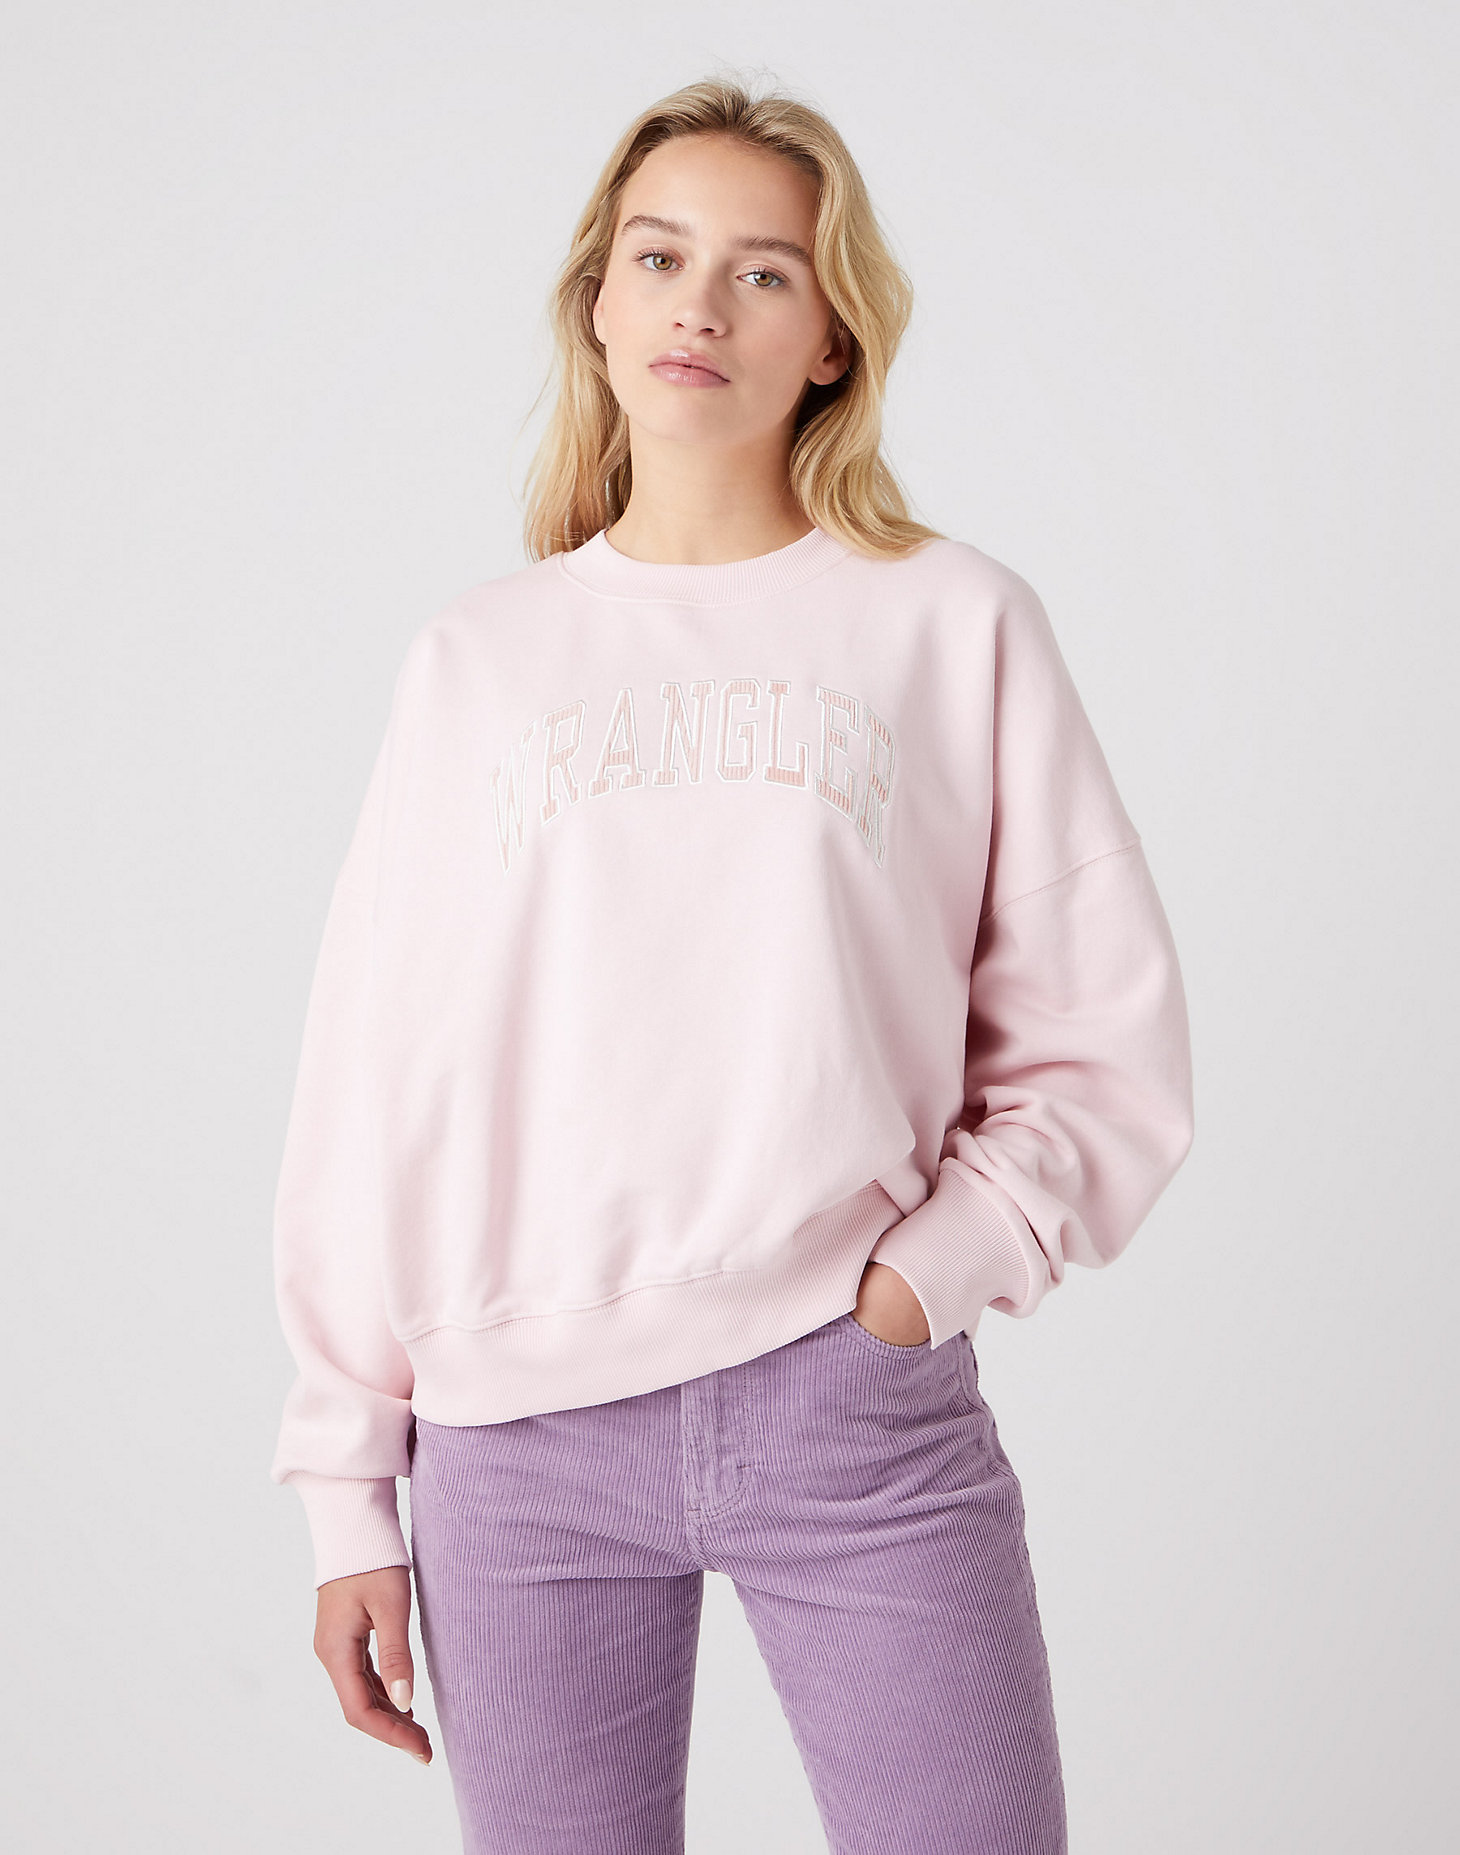 Relaxed Sweatshirt in Chalk Pink main view